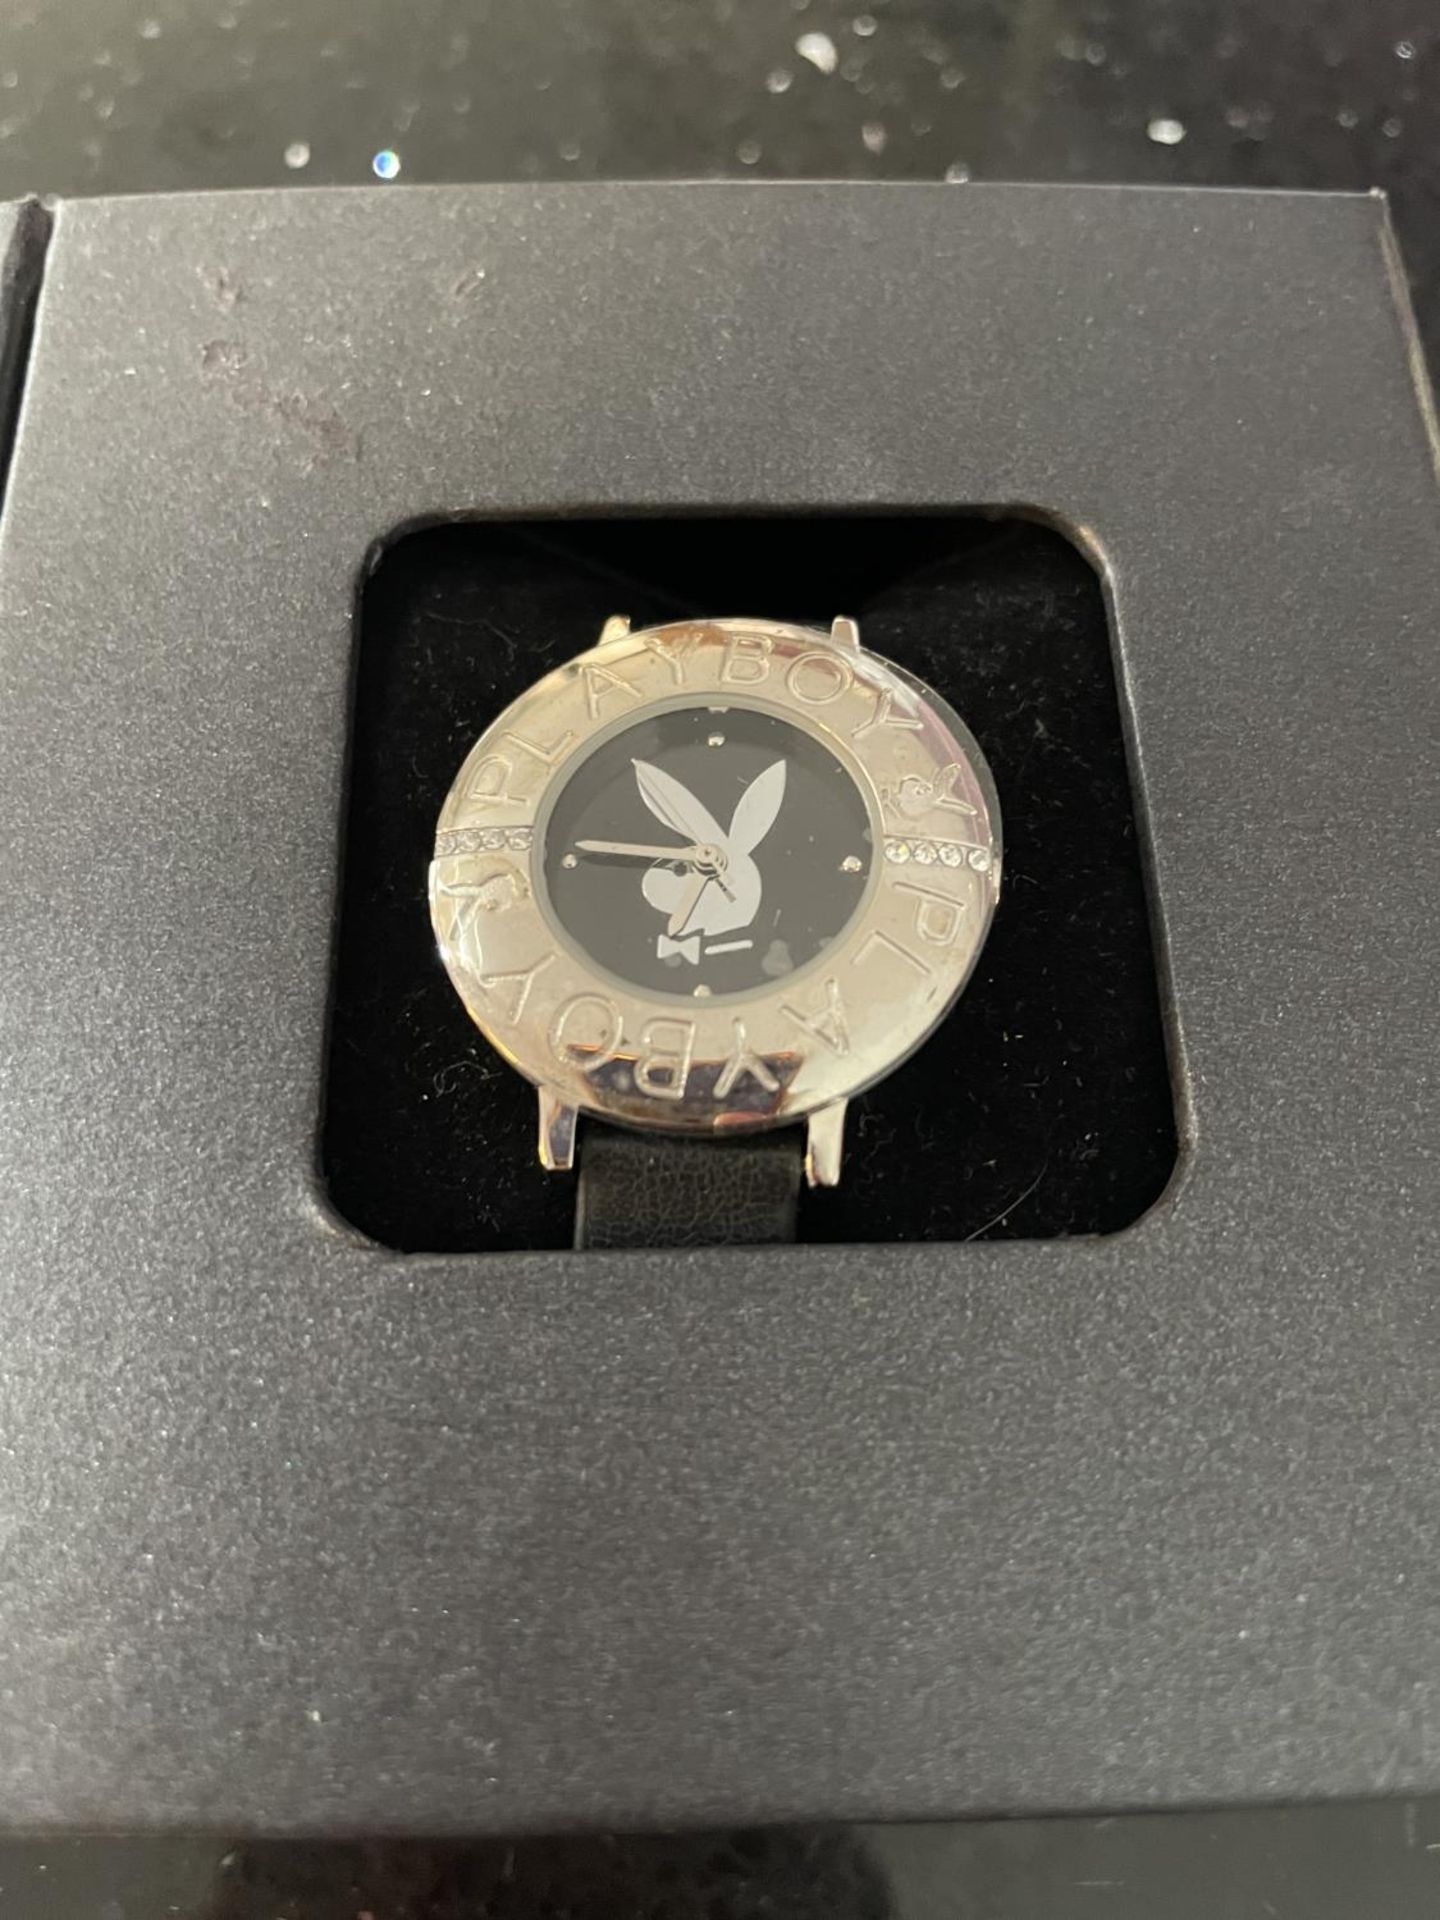 A PLAYBOY WATCH IN A PRESENTATION BOX SEEN WORKING BUT NO WARRANTY - Image 3 of 4